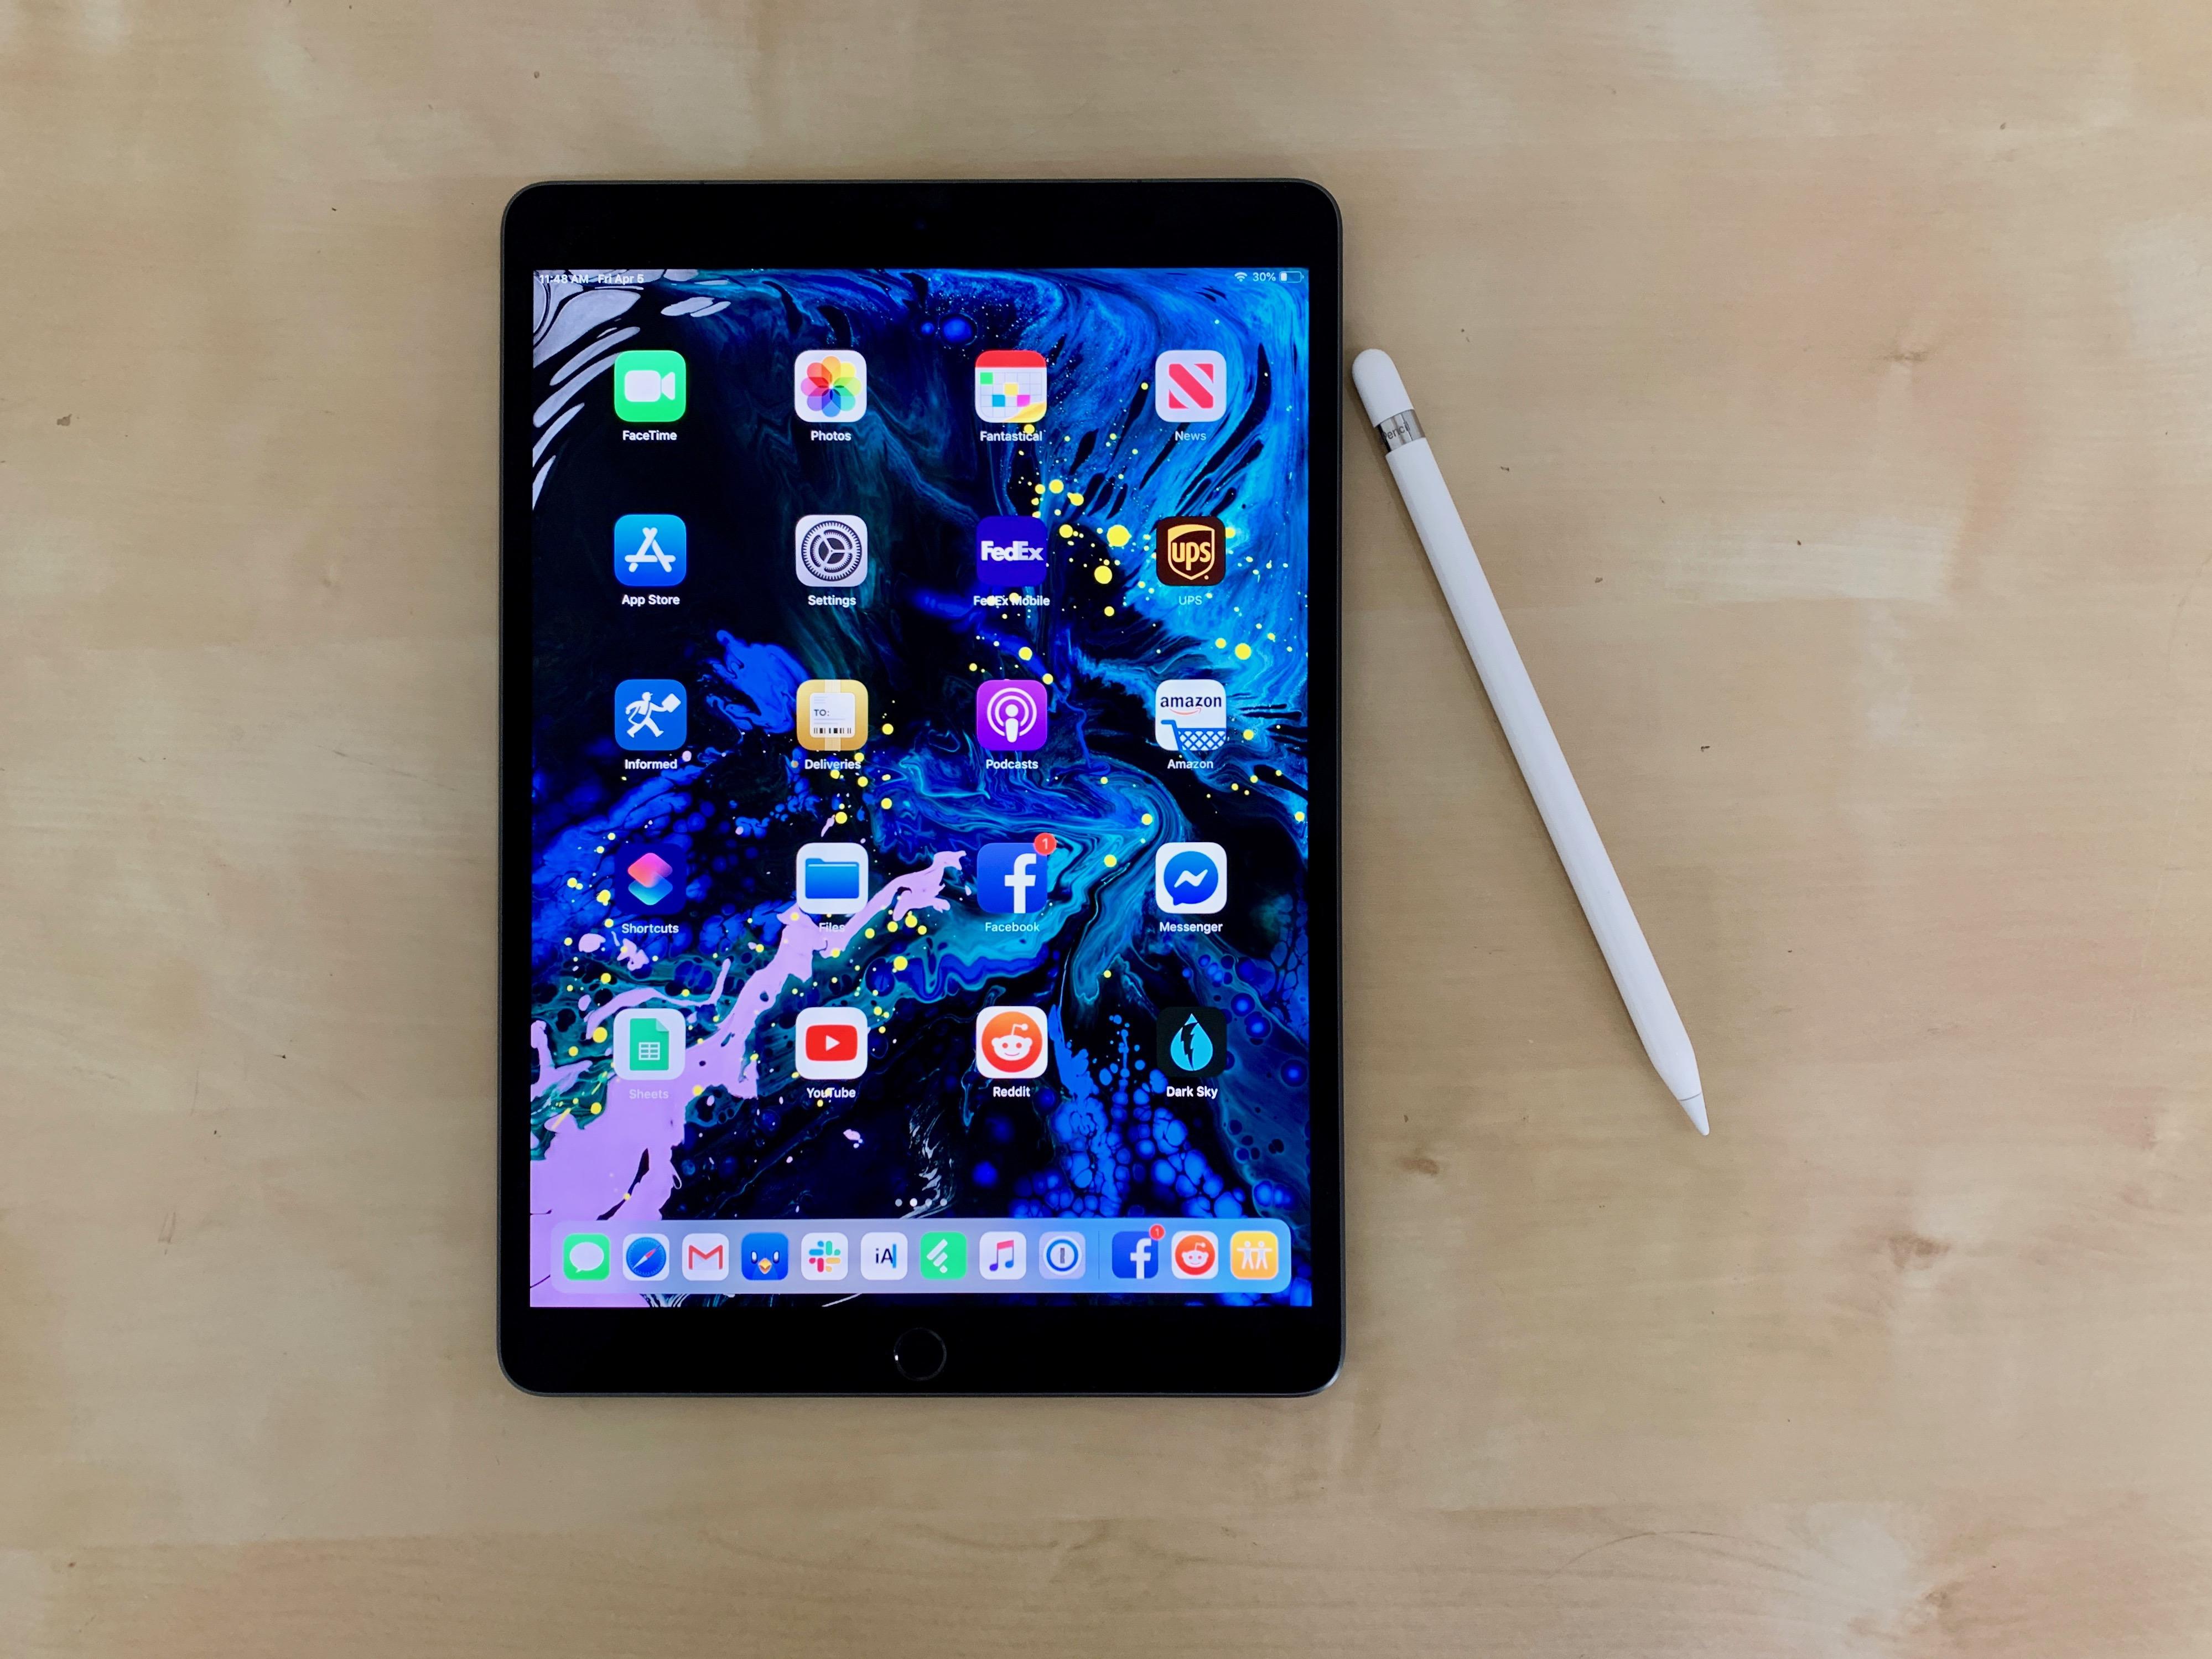 Apple iPad Air 3 (2019): Unboxing & Review 